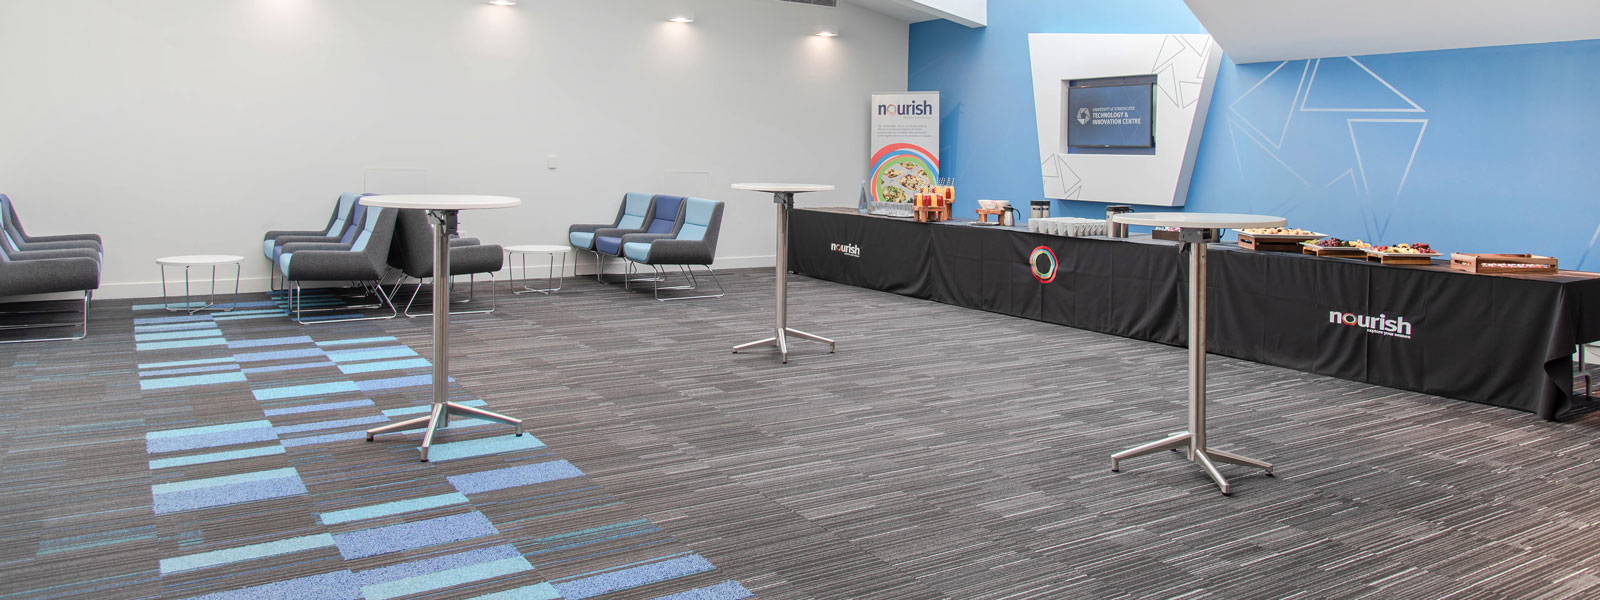 Level 9 foyer in the Technology and Innovation Centre, set with catering station, soft seats and poseur tables.  Photo: Lucy Knott